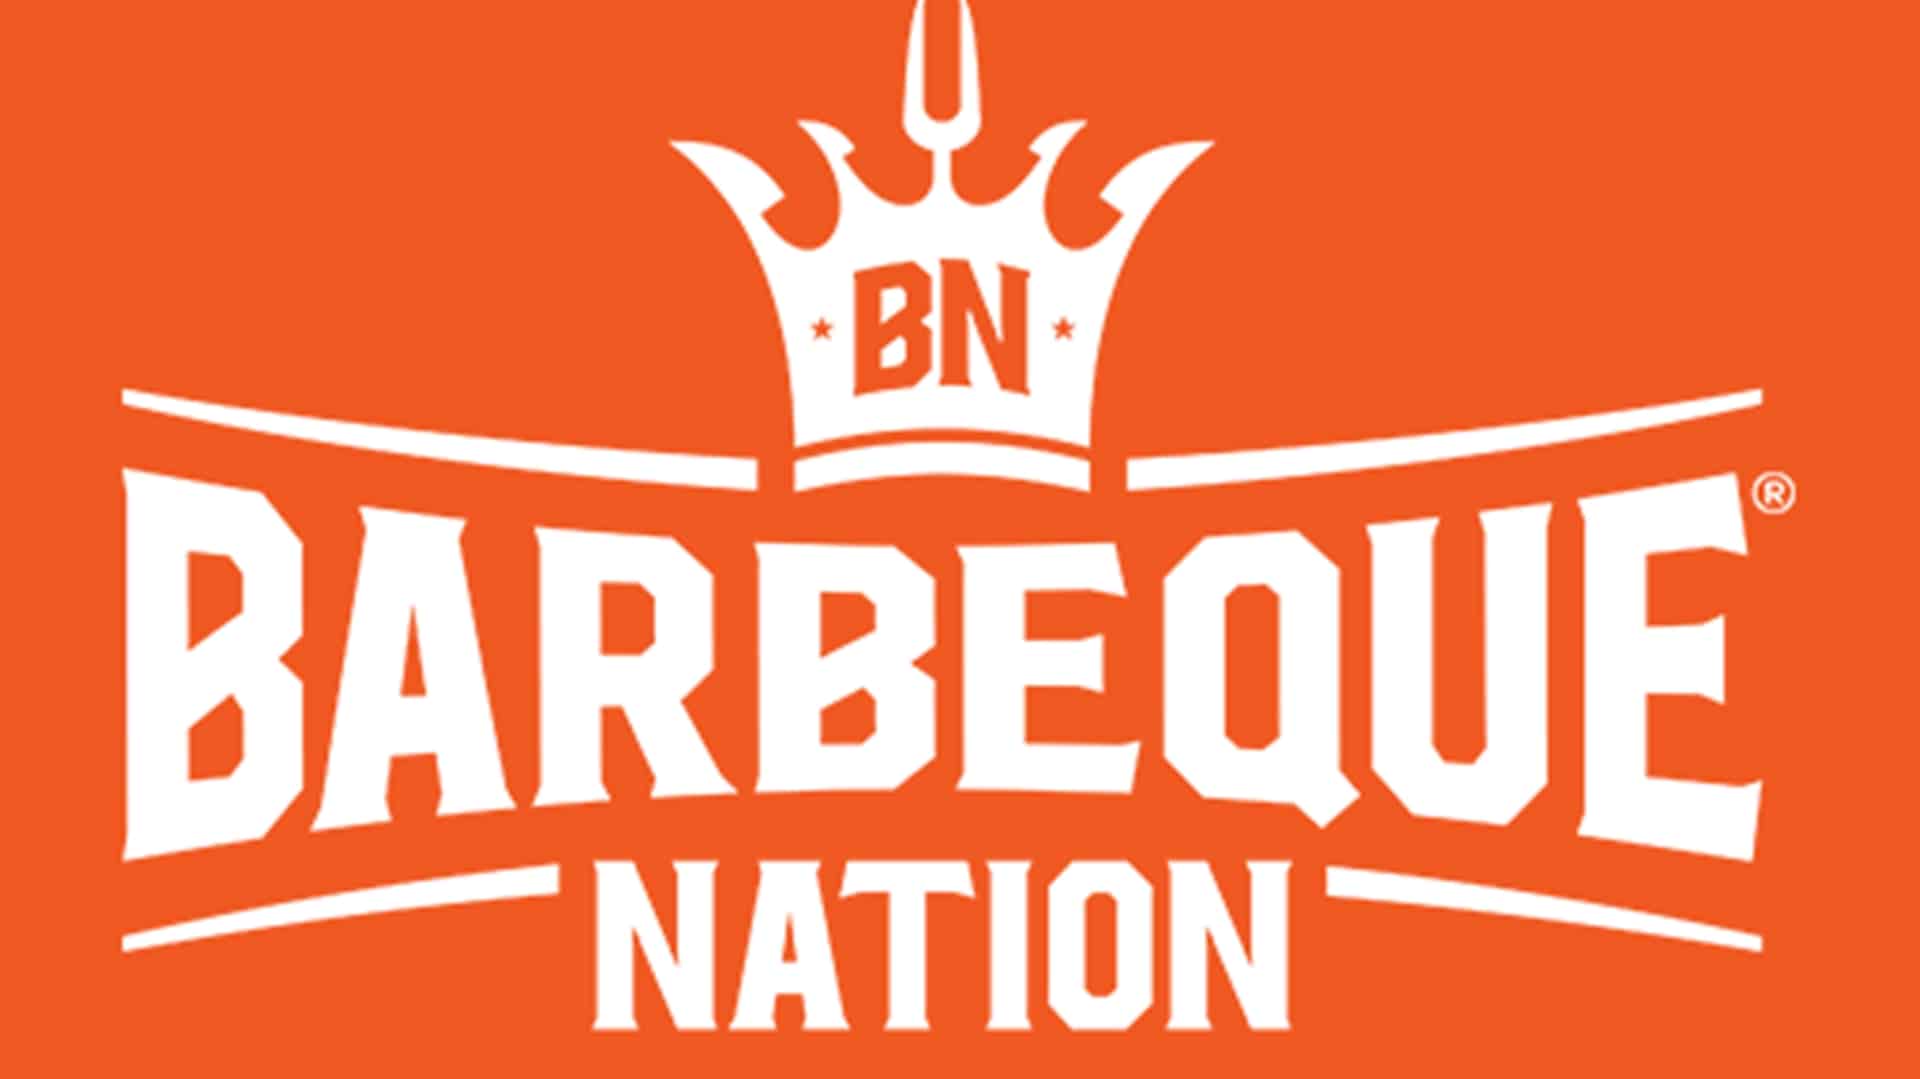 Barbeque Nation raises fund via preferential issue of equity shares